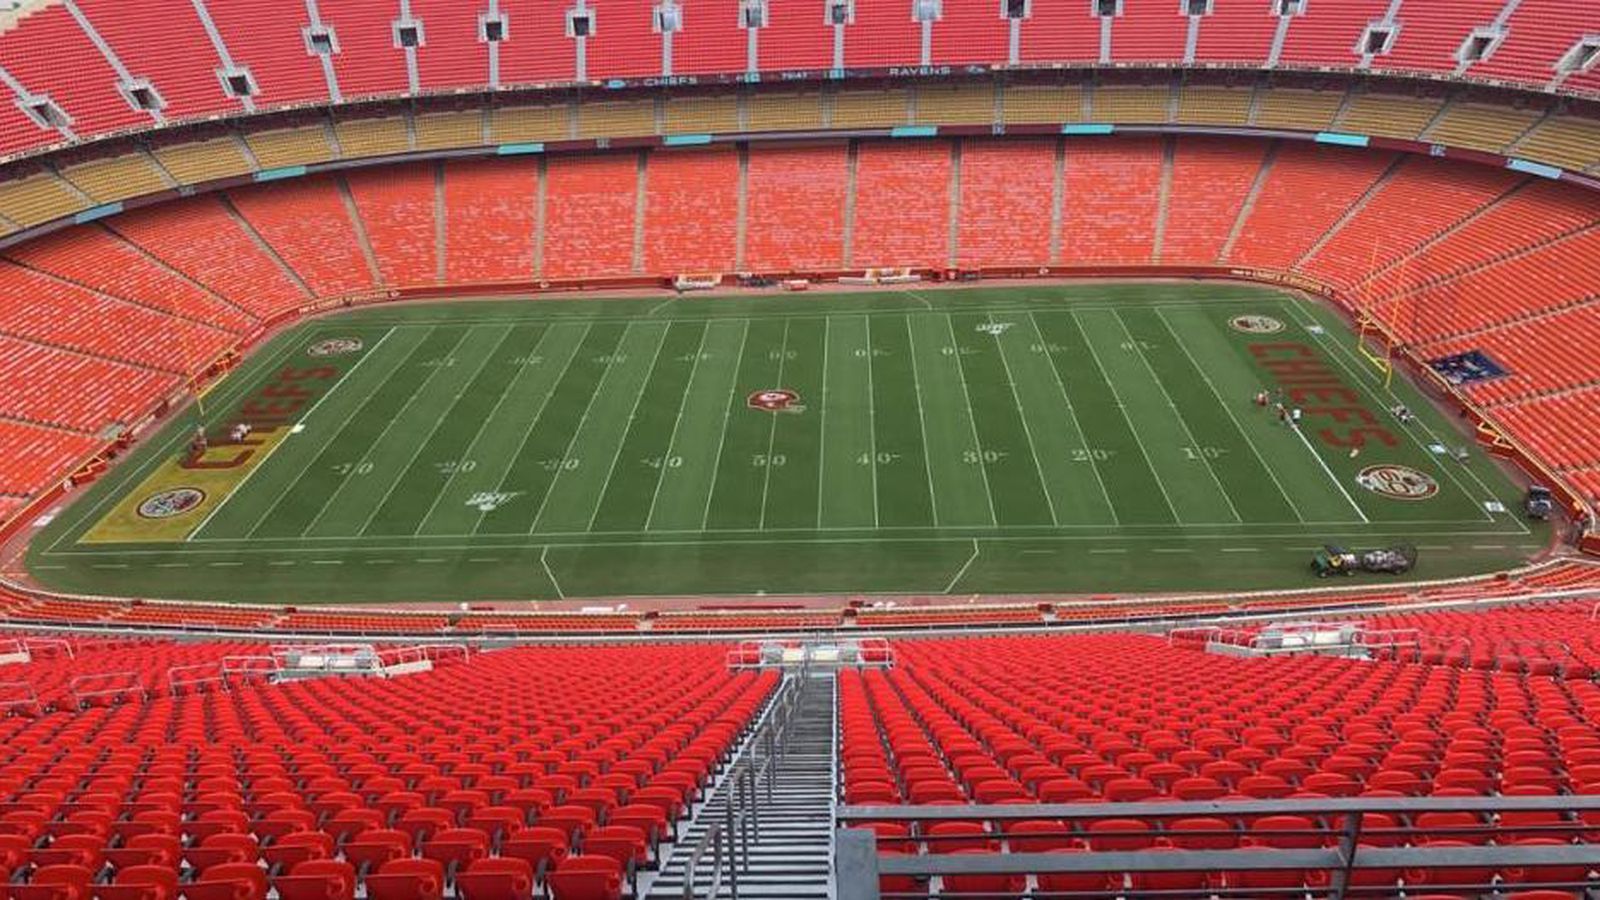 Gold end zones are coming to Arrowhead Stadium on Sunday vs. Ravens